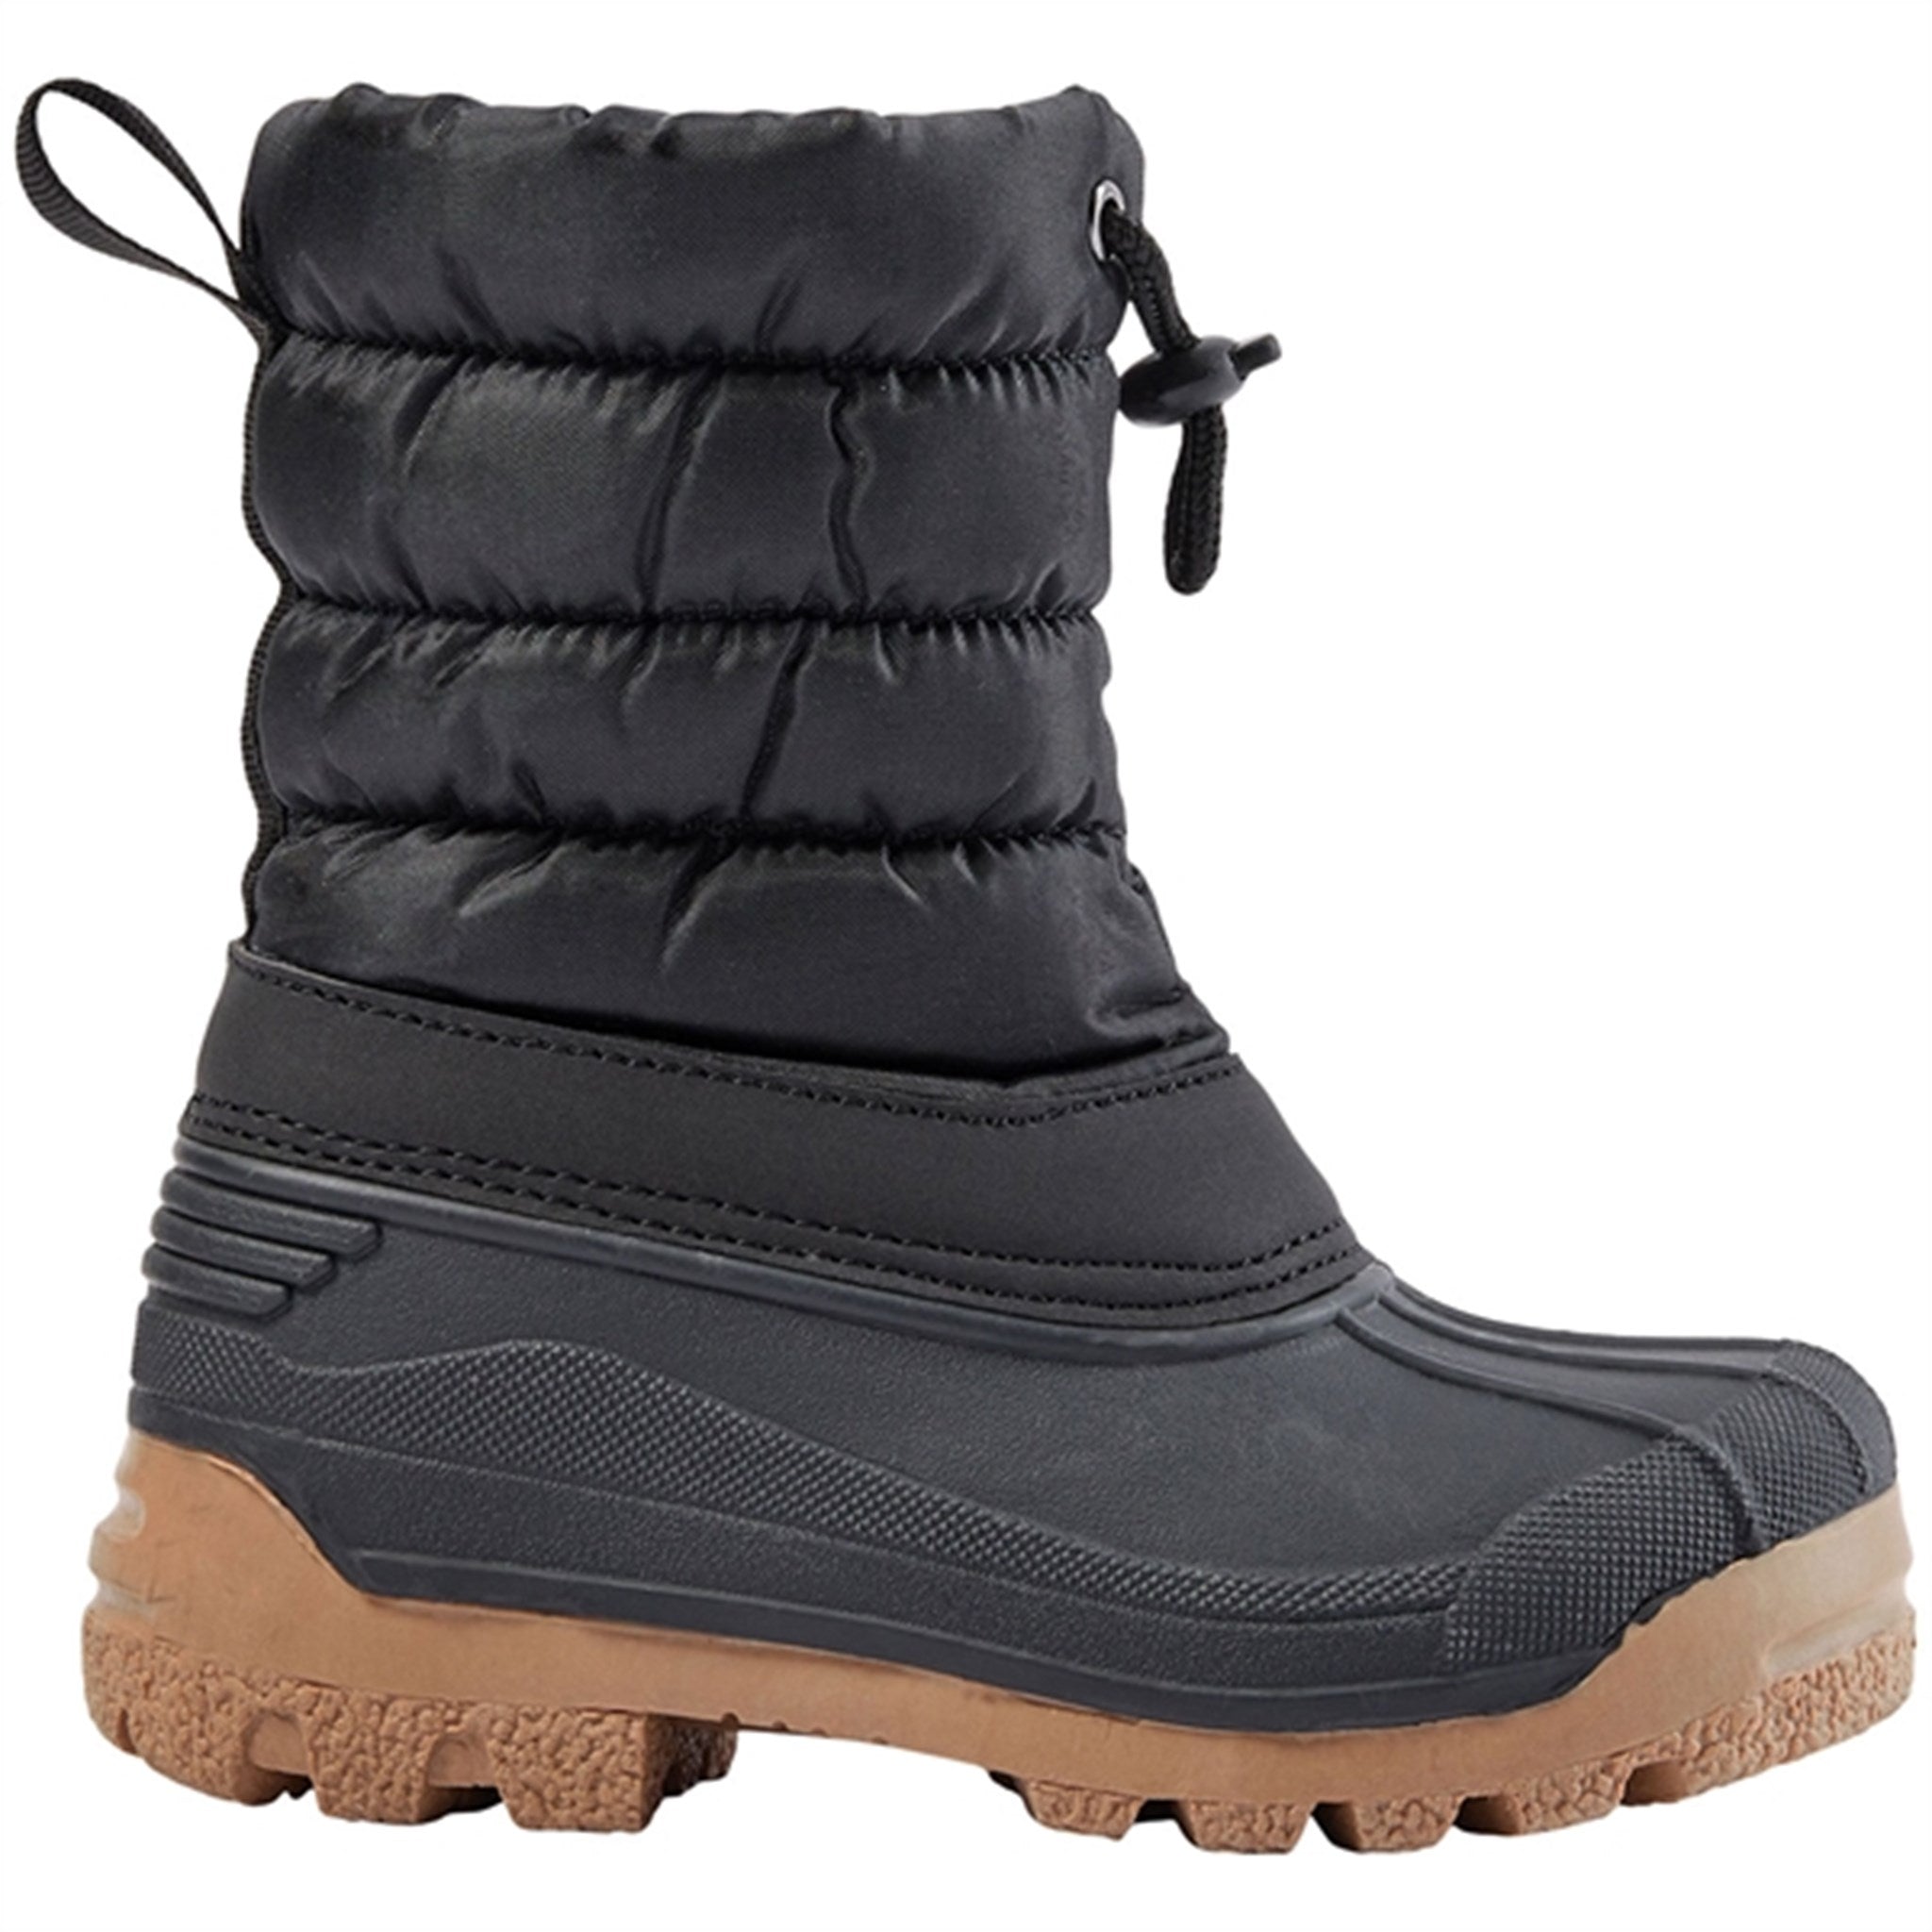 Sofie Schnoor Thermo Boots Black 5